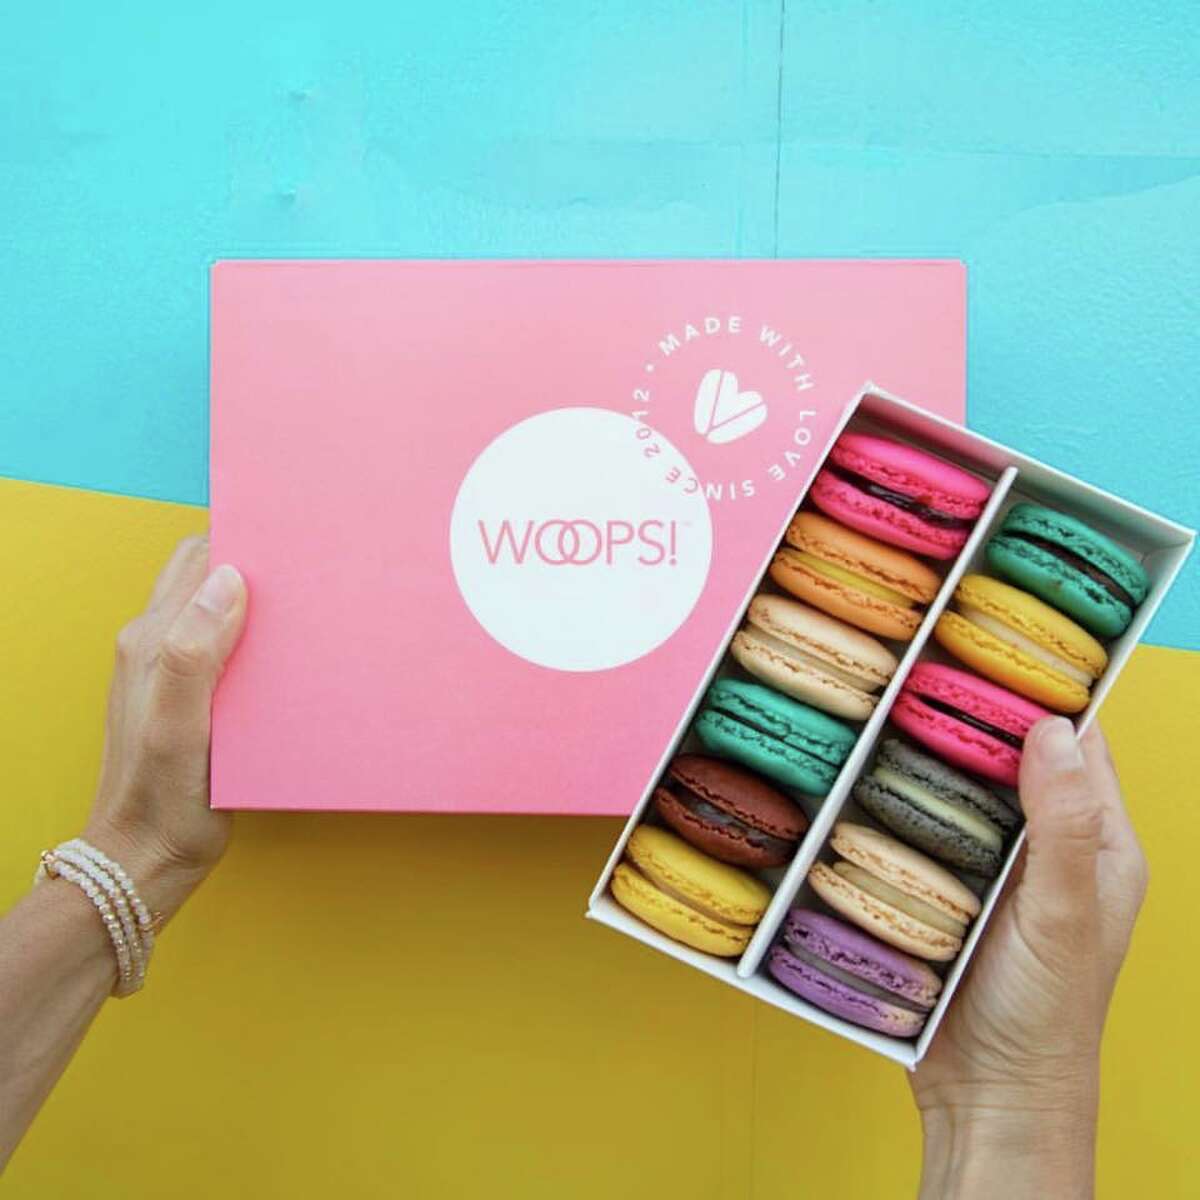 Woops!, a New York-based bakery specializing in macarons and other international pastries, has opened in Laredo.